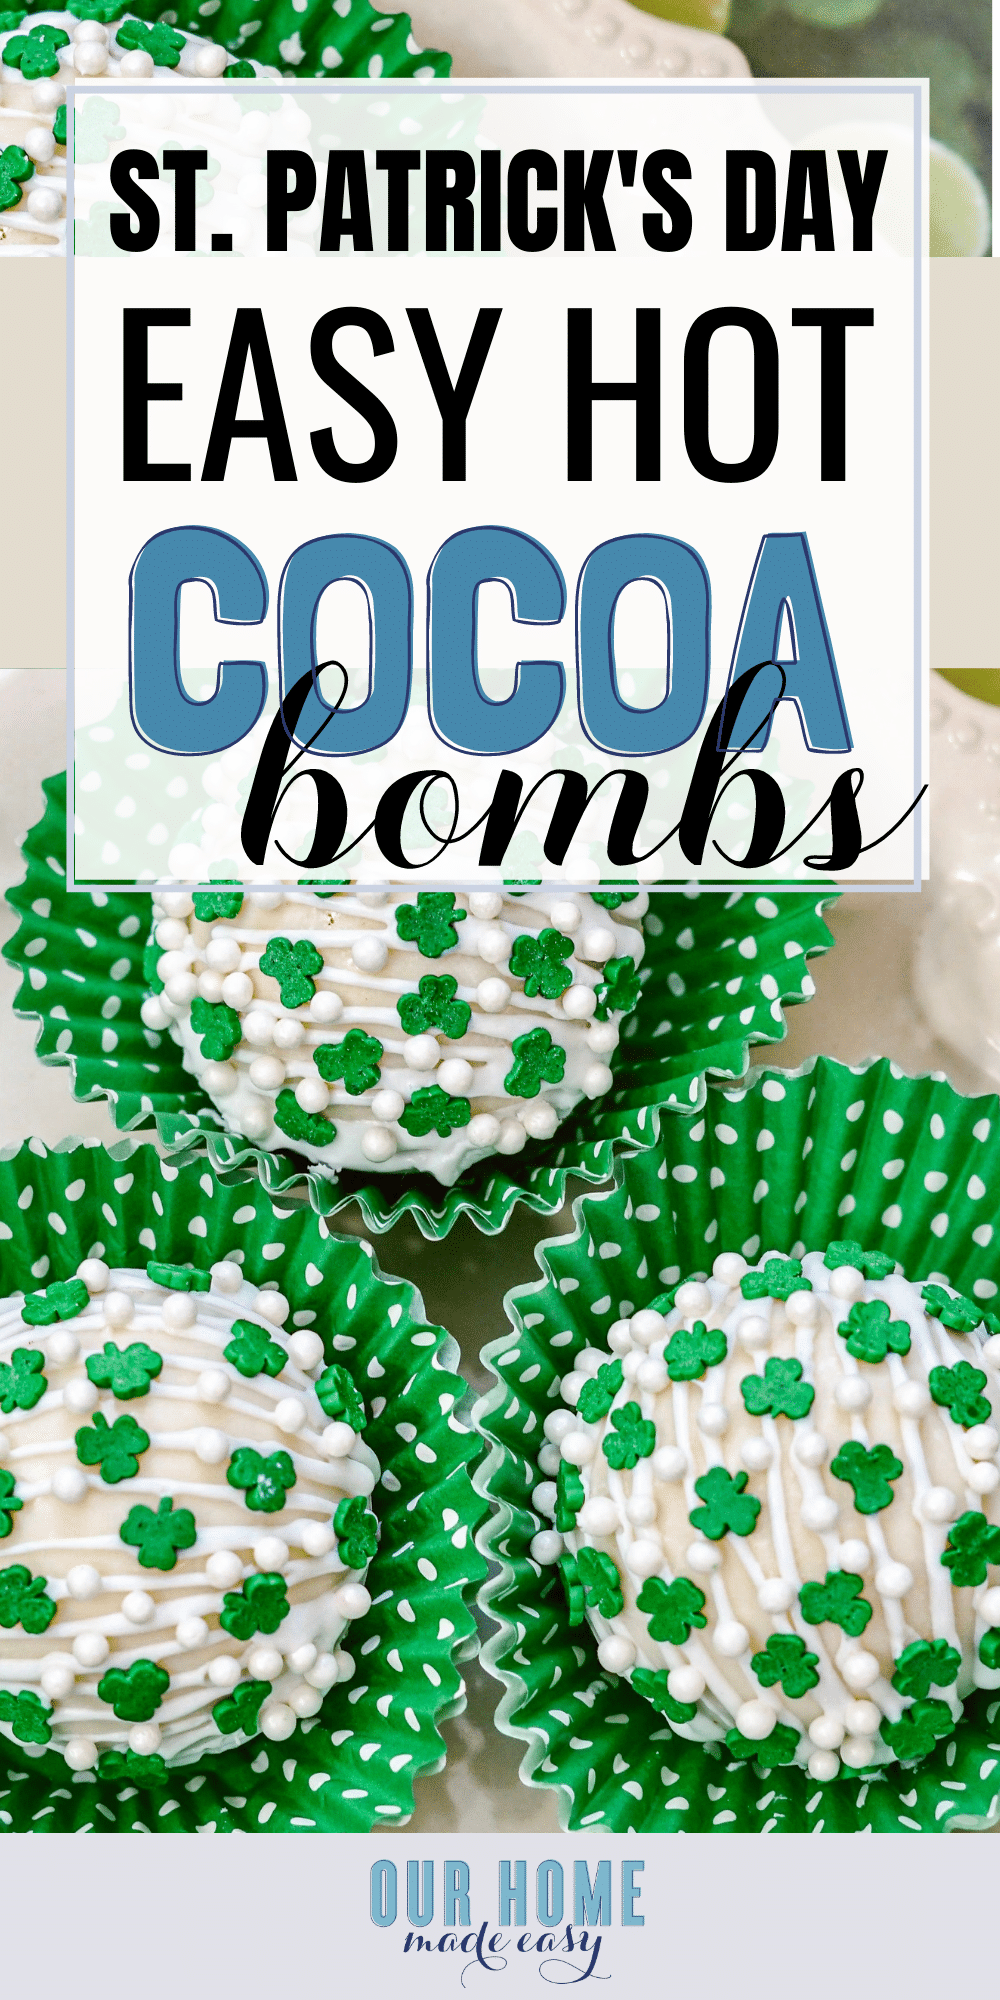 Green Shamrock Sprinkles Covering White Chocolate Hot Cocoa bombs